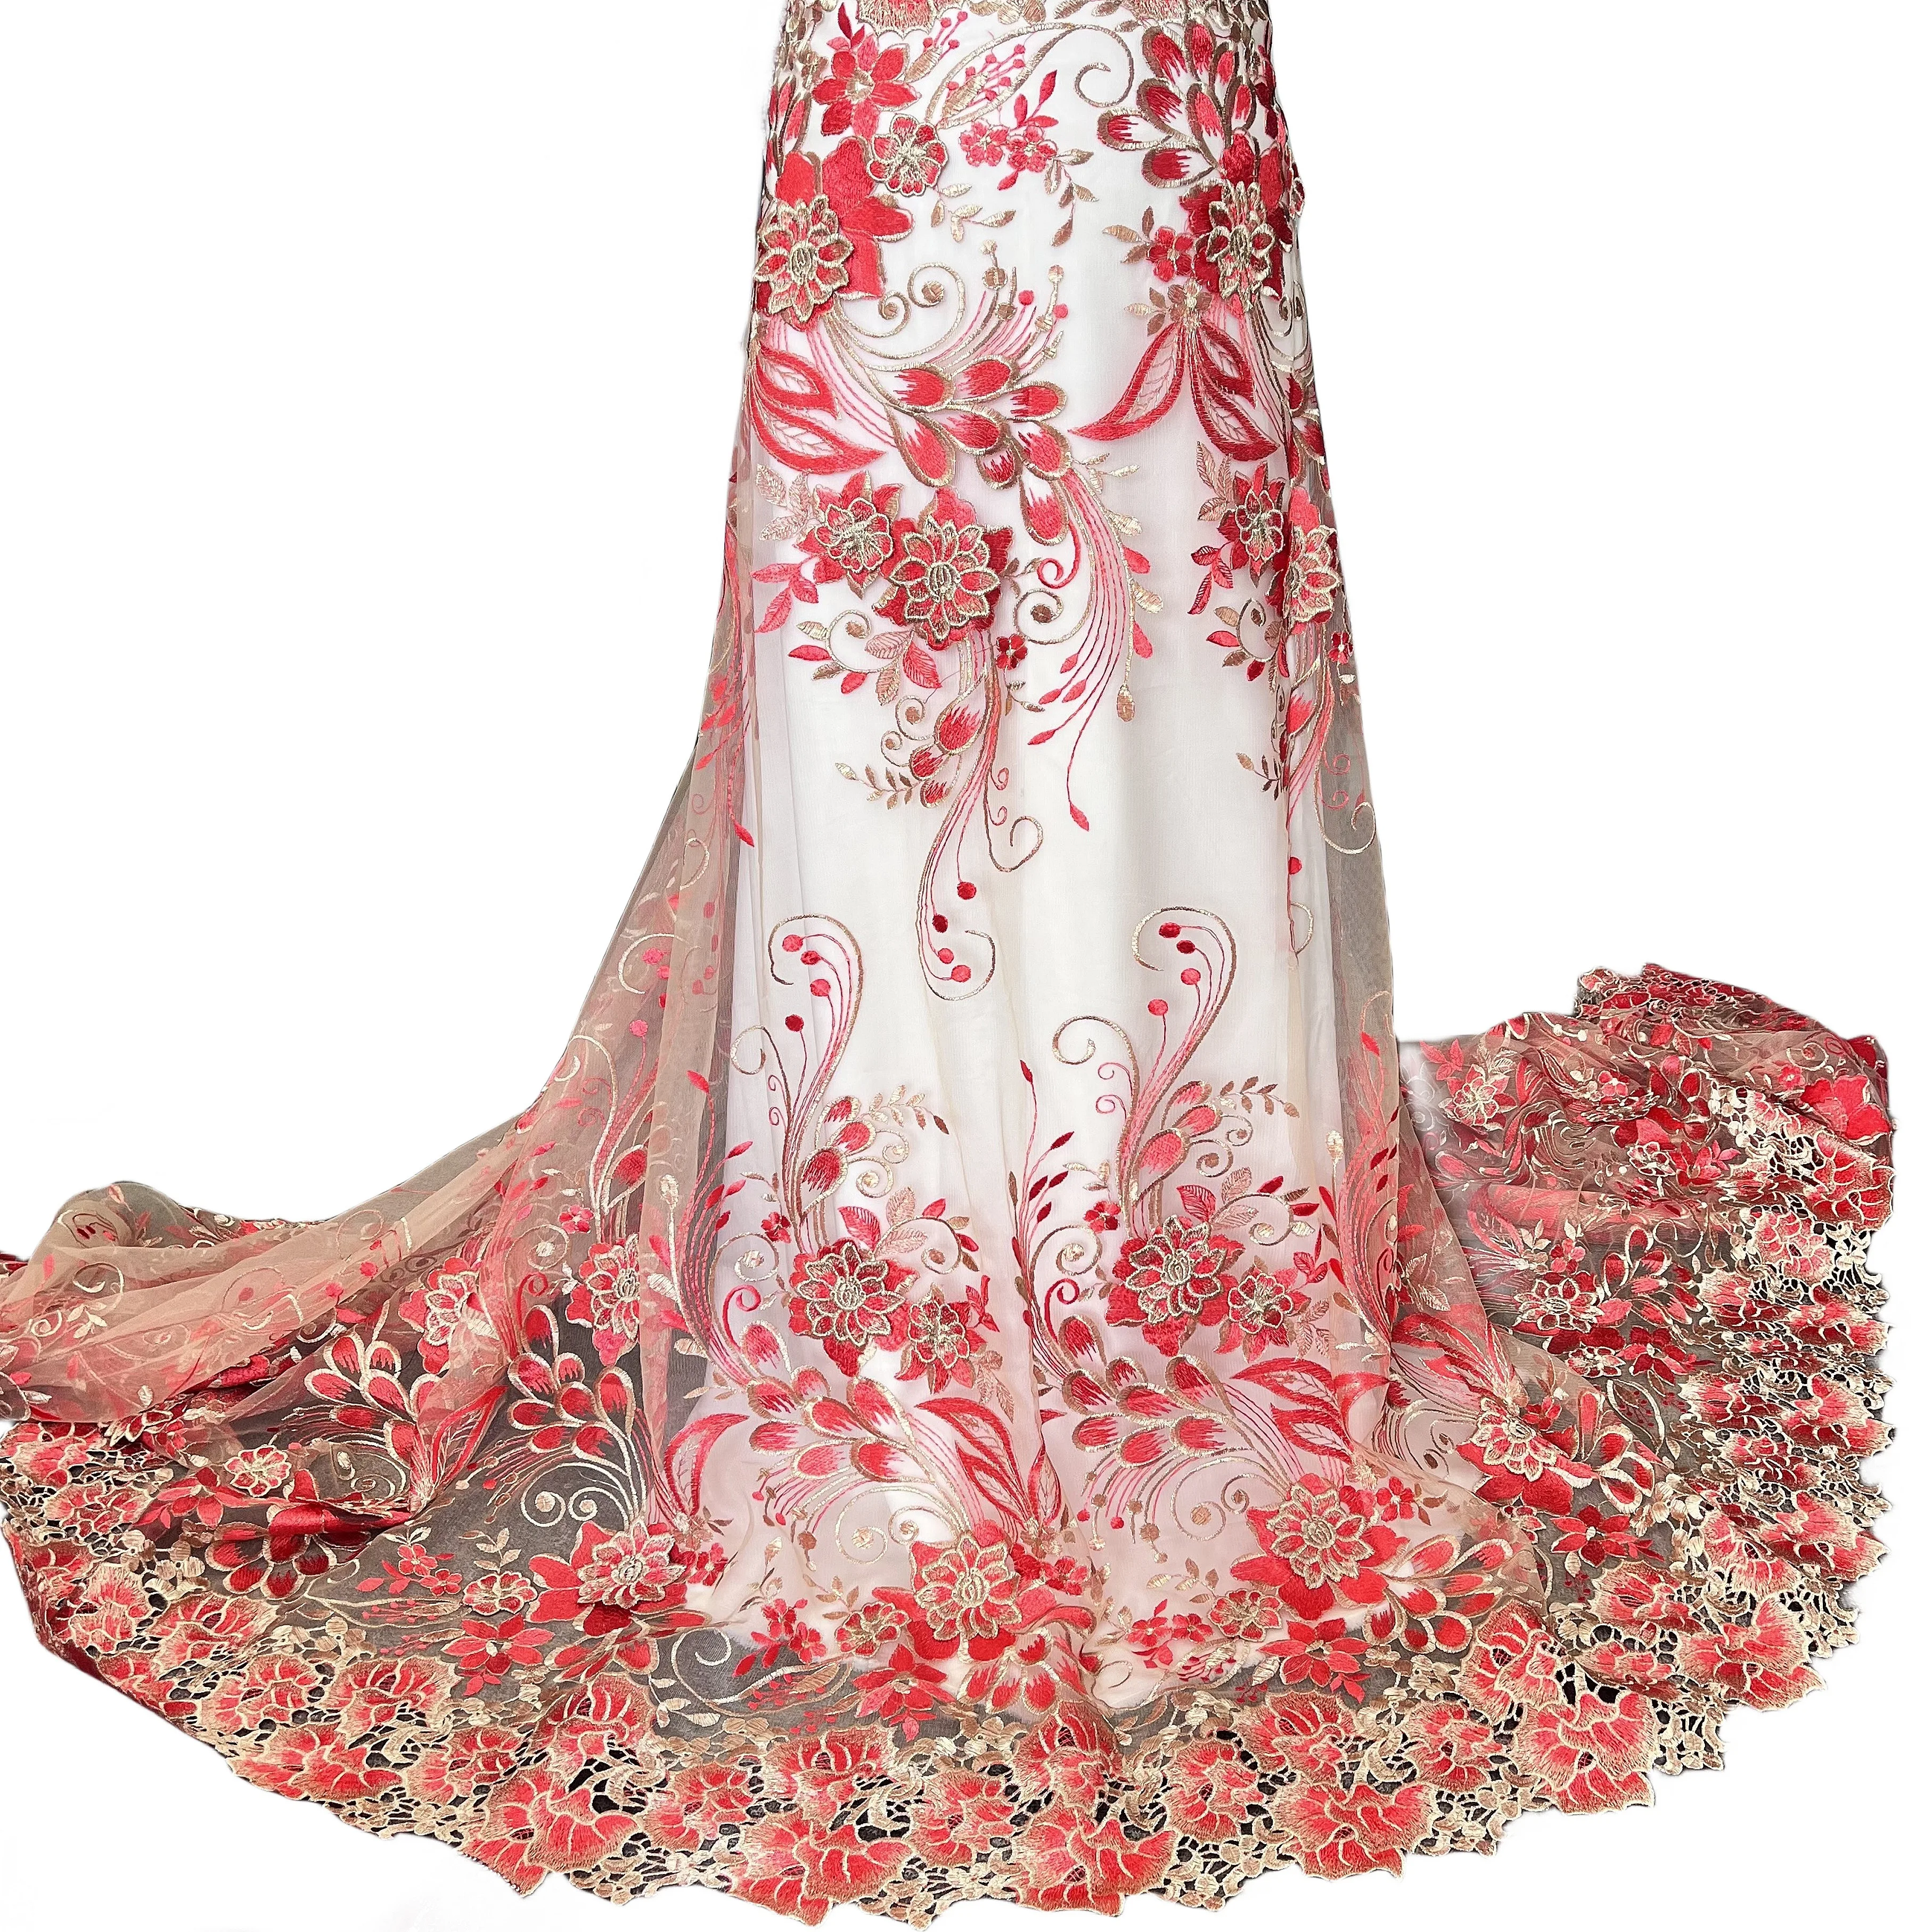 

YQOINFKS Latest Tulle French Lace African Fabric Red Applique Floral Design Net Cloth Sewing Women Wedding Party Dress YQ-605081